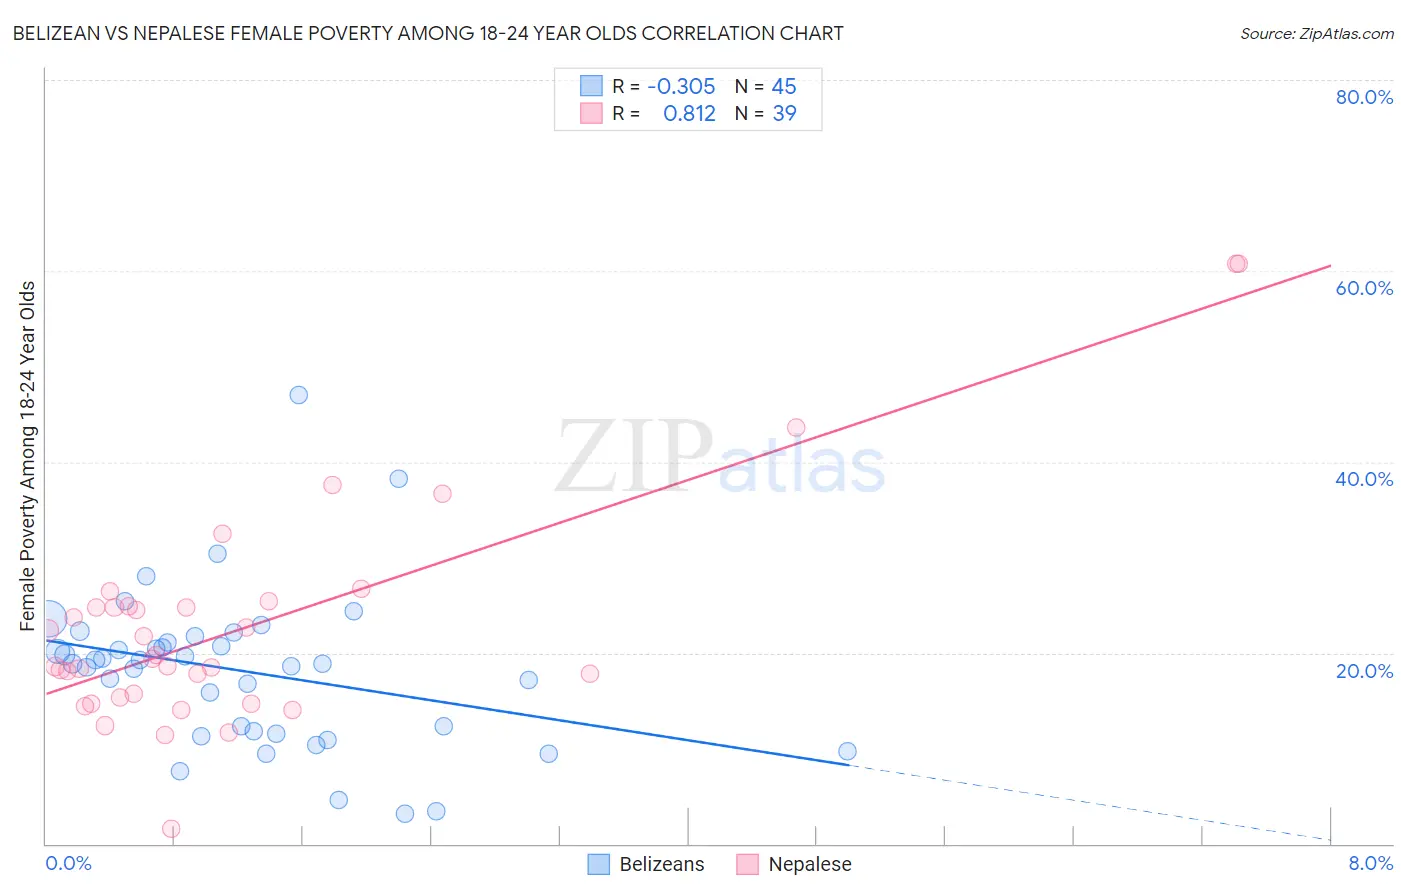 Belizean vs Nepalese Female Poverty Among 18-24 Year Olds